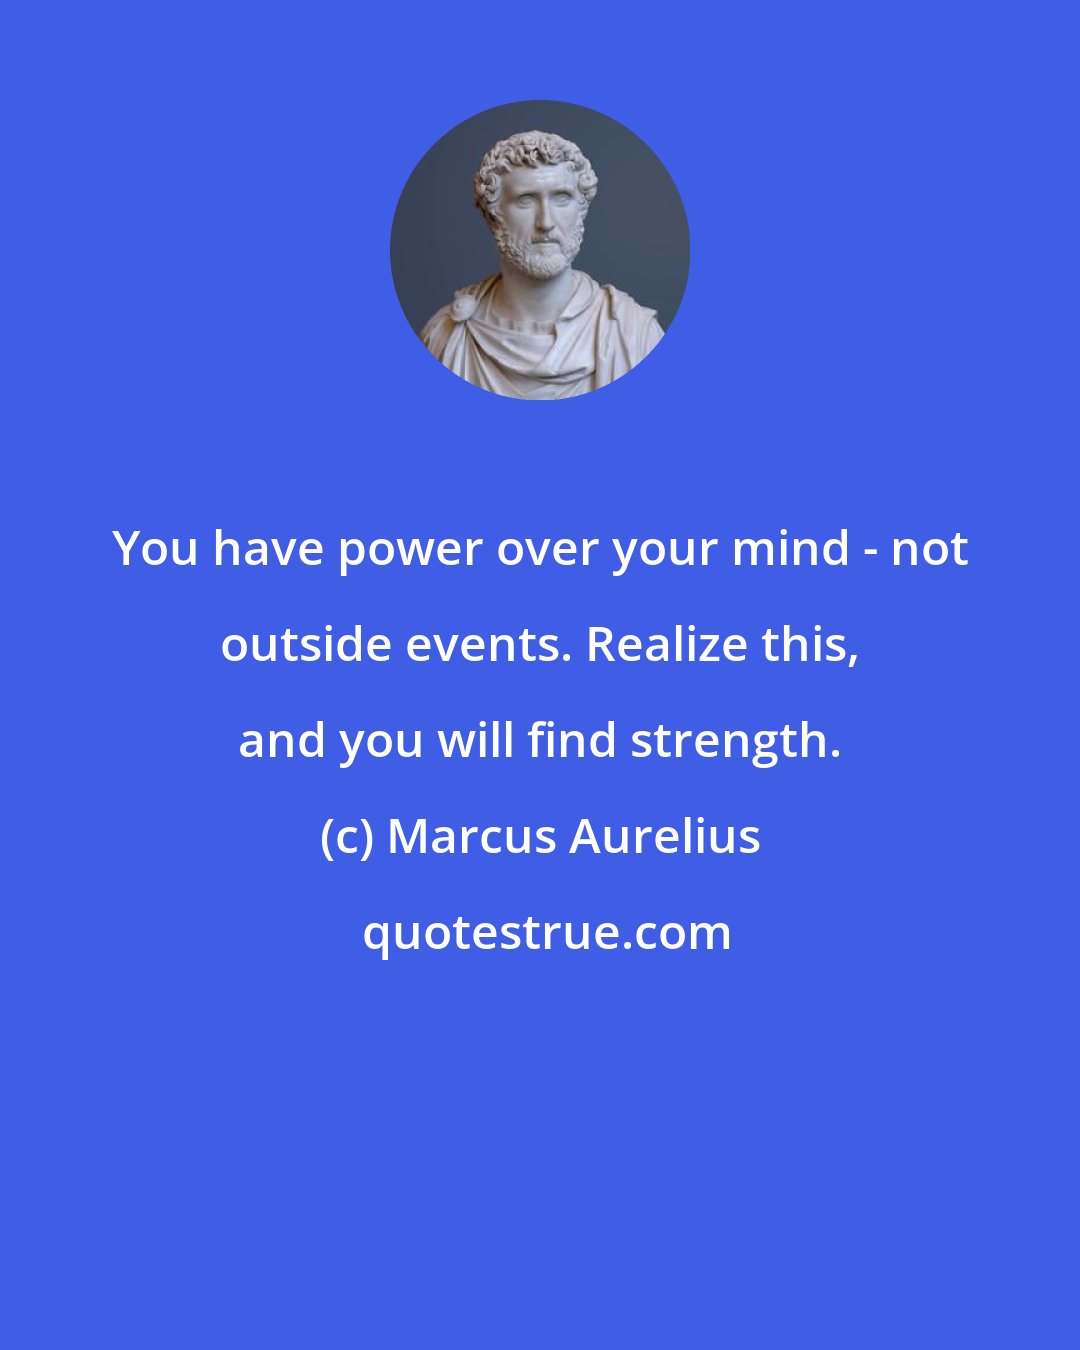 Marcus Aurelius: You have power over your mind - not outside events. Realize this, and you will find strength.